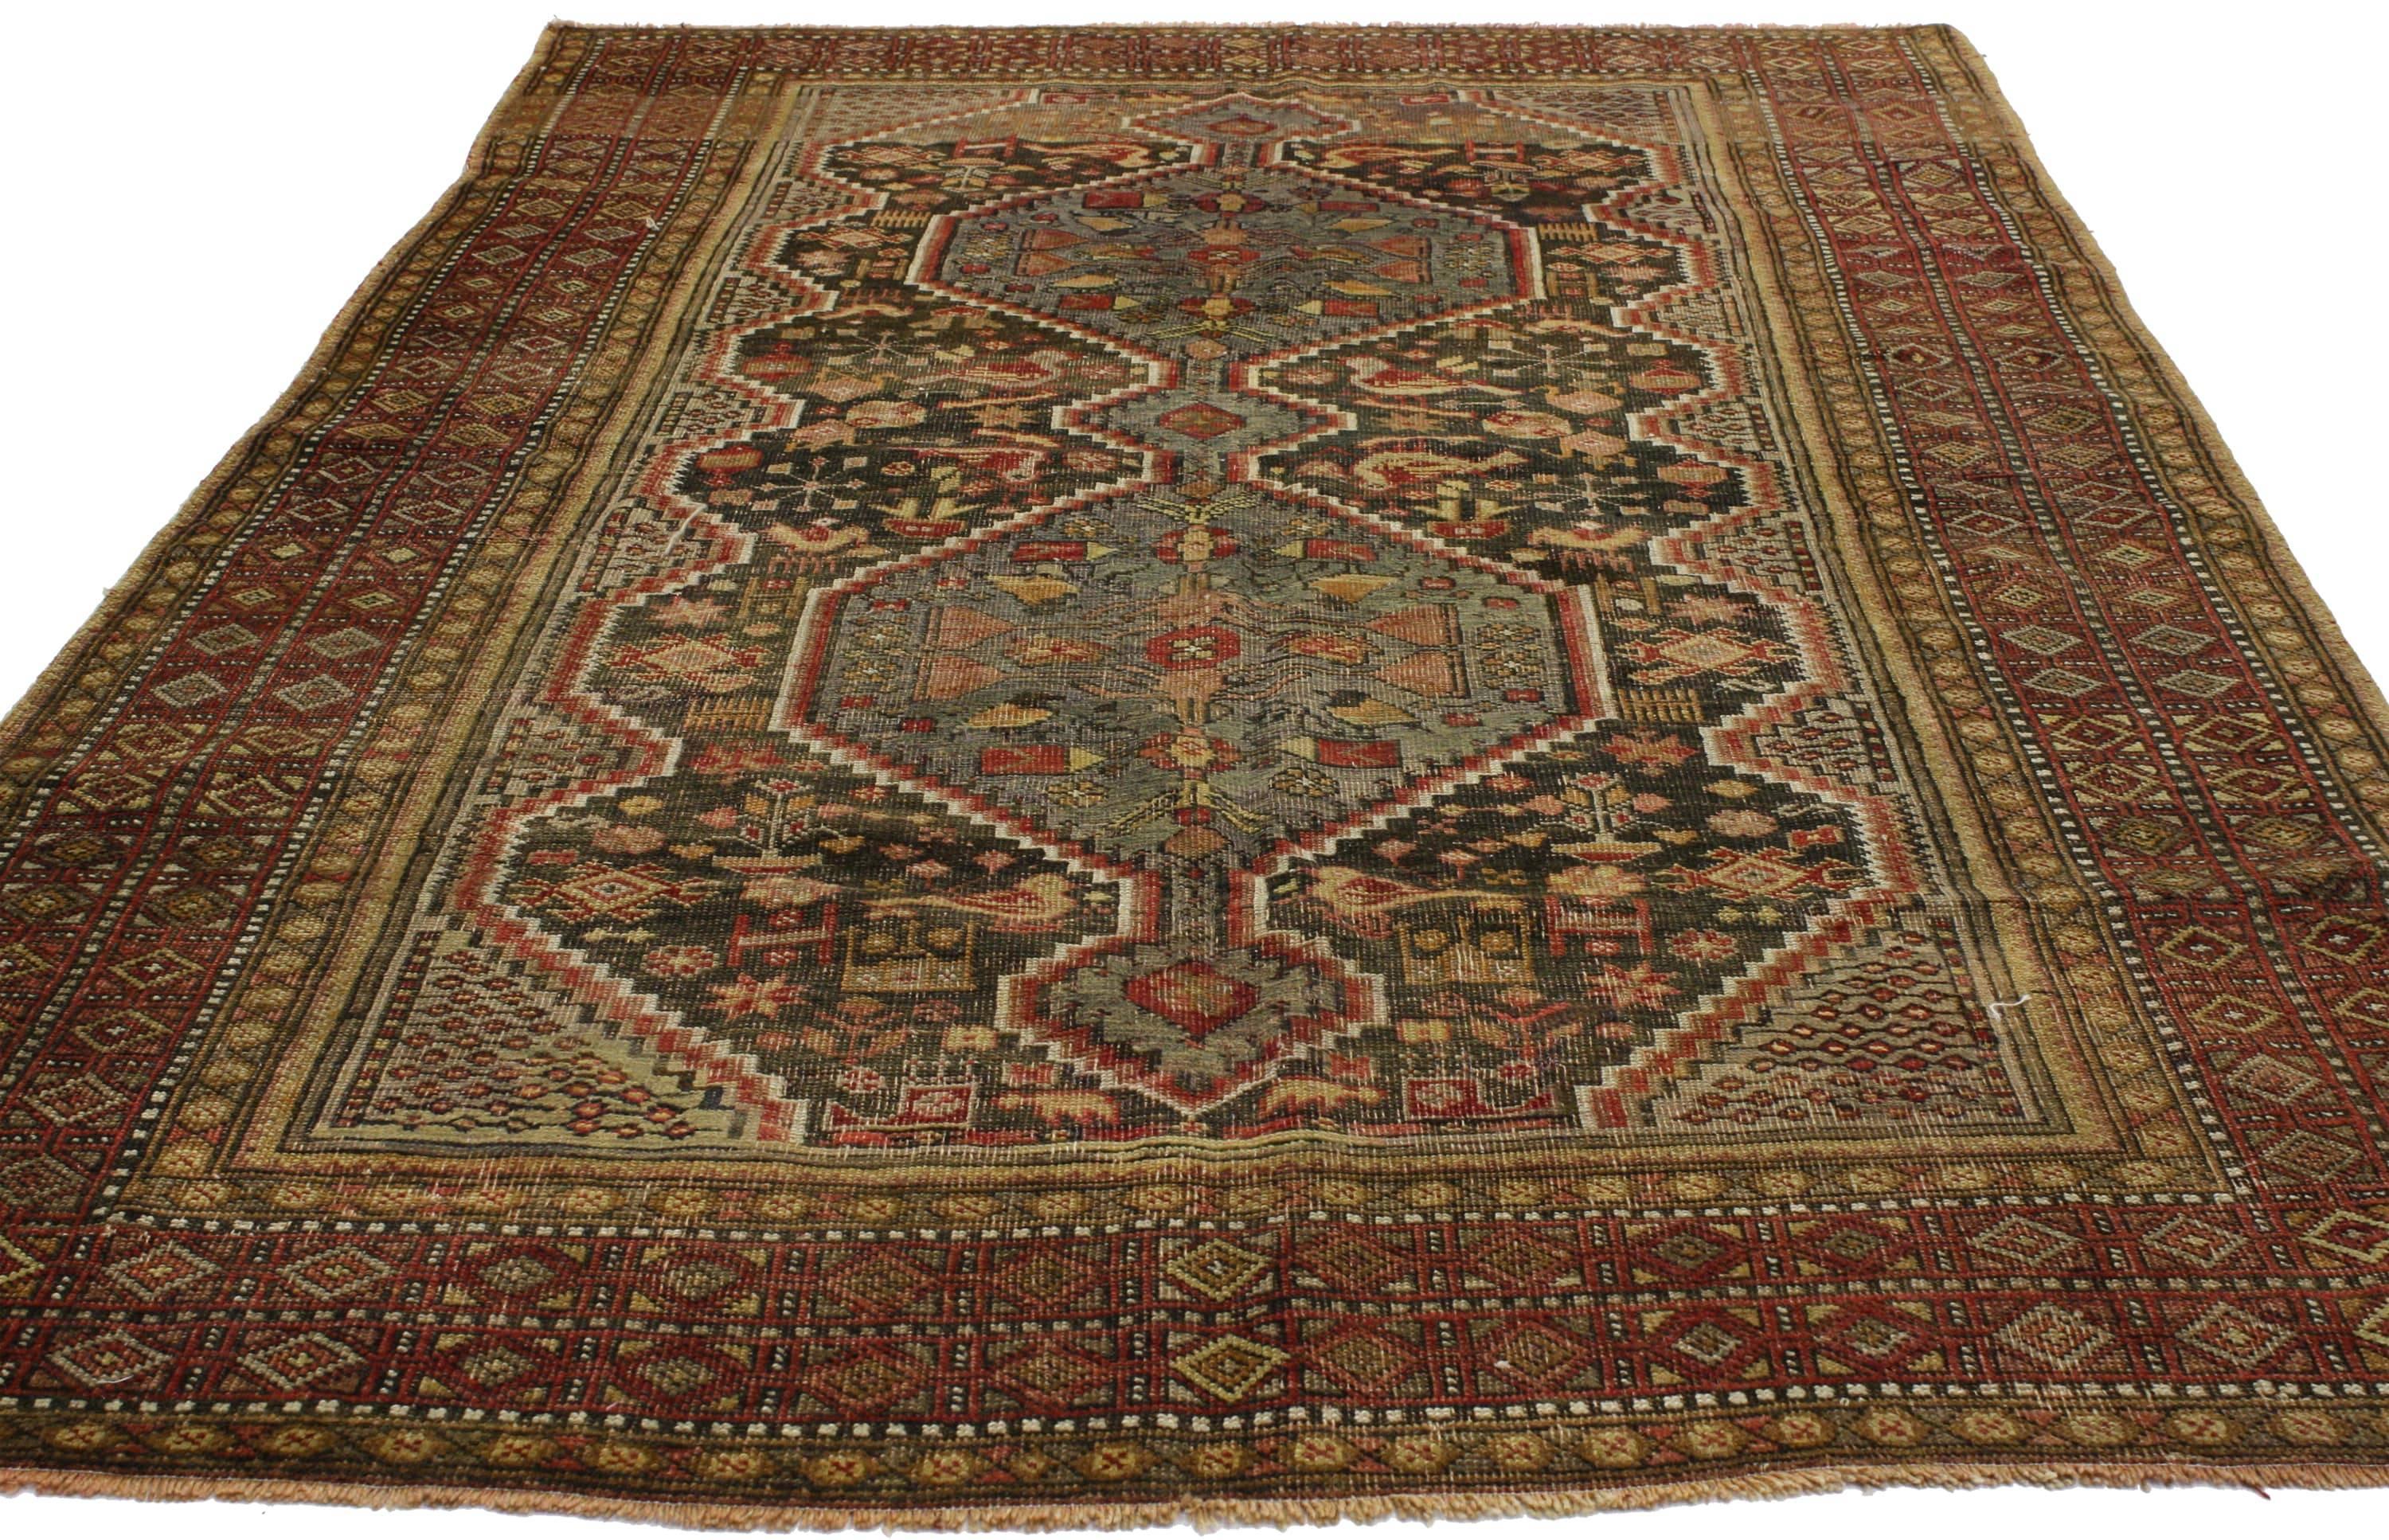 Hand-Knotted Distressed Antique Persian Shiraz Rug with Rustic Tribal Style